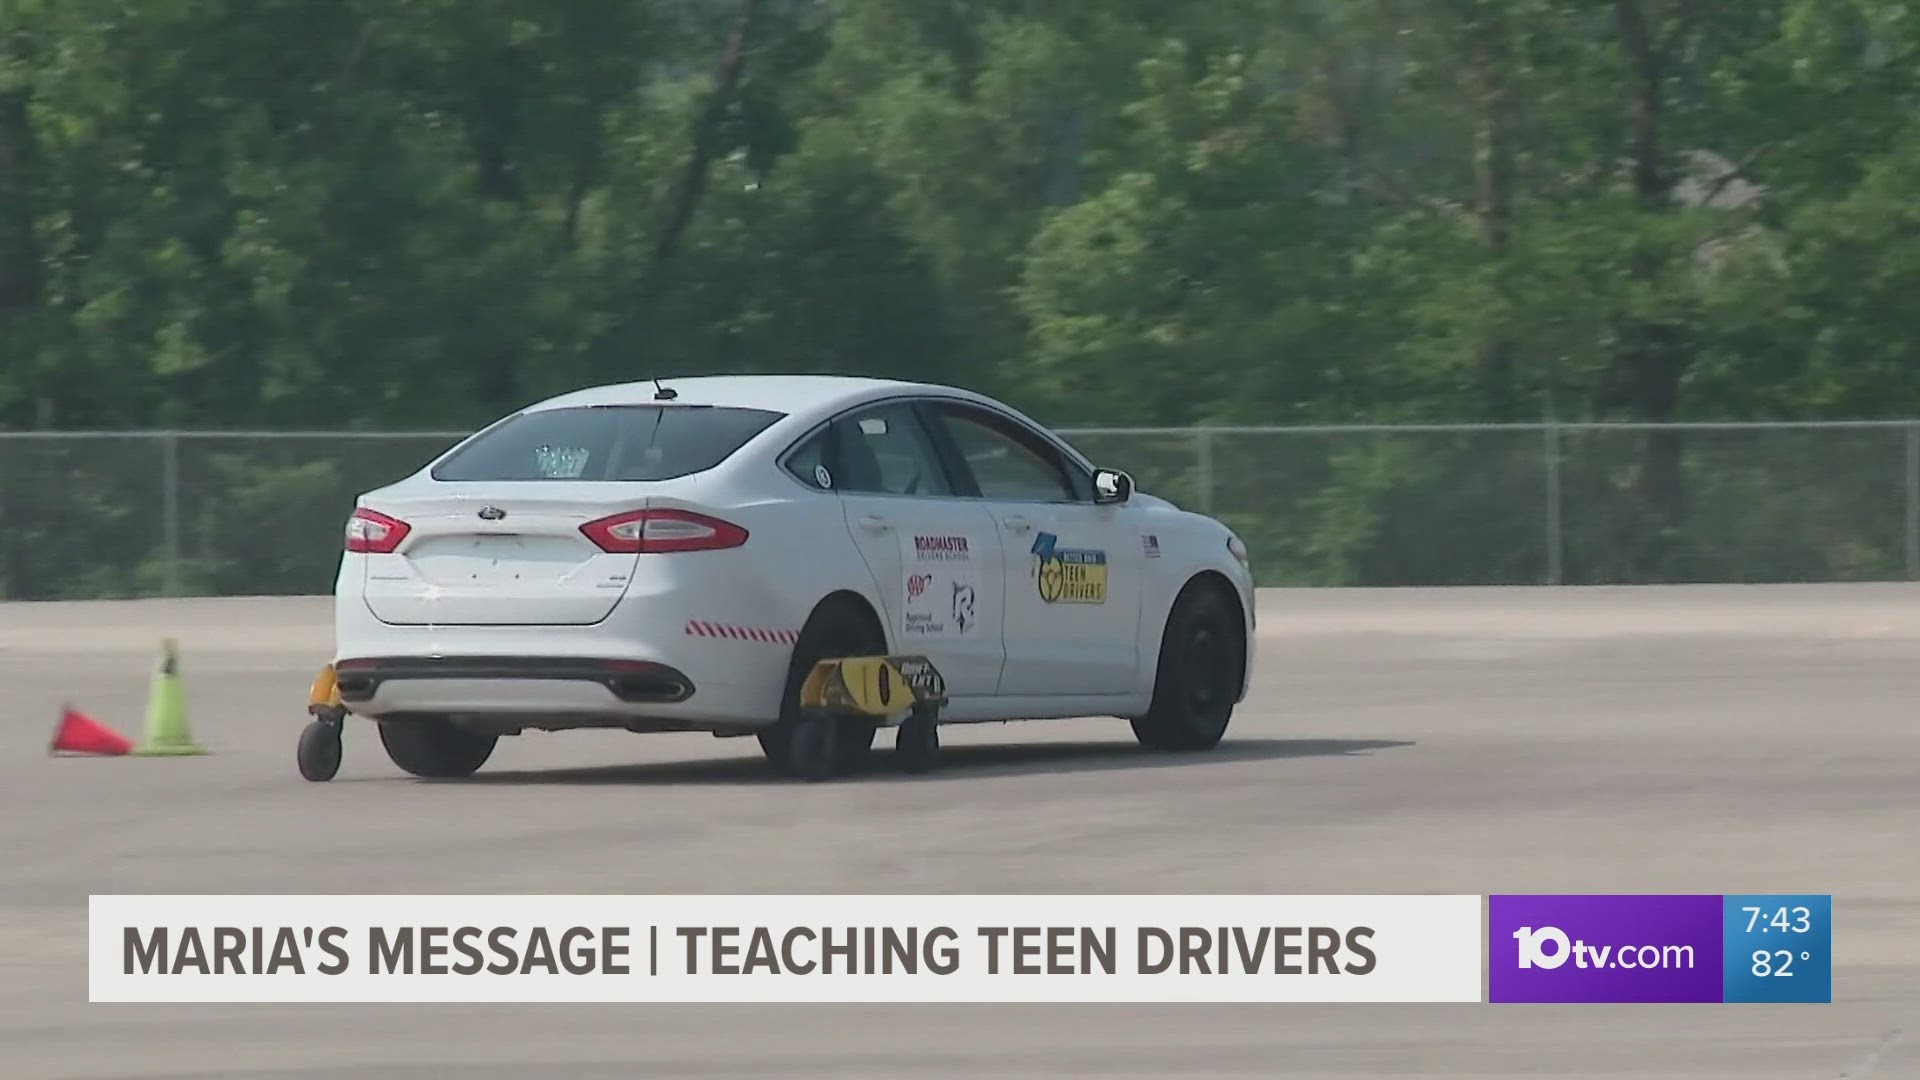 Through the program, students will have a better understanding of how important it is to be completely and totally aware and focused when they’re behind the wheel.